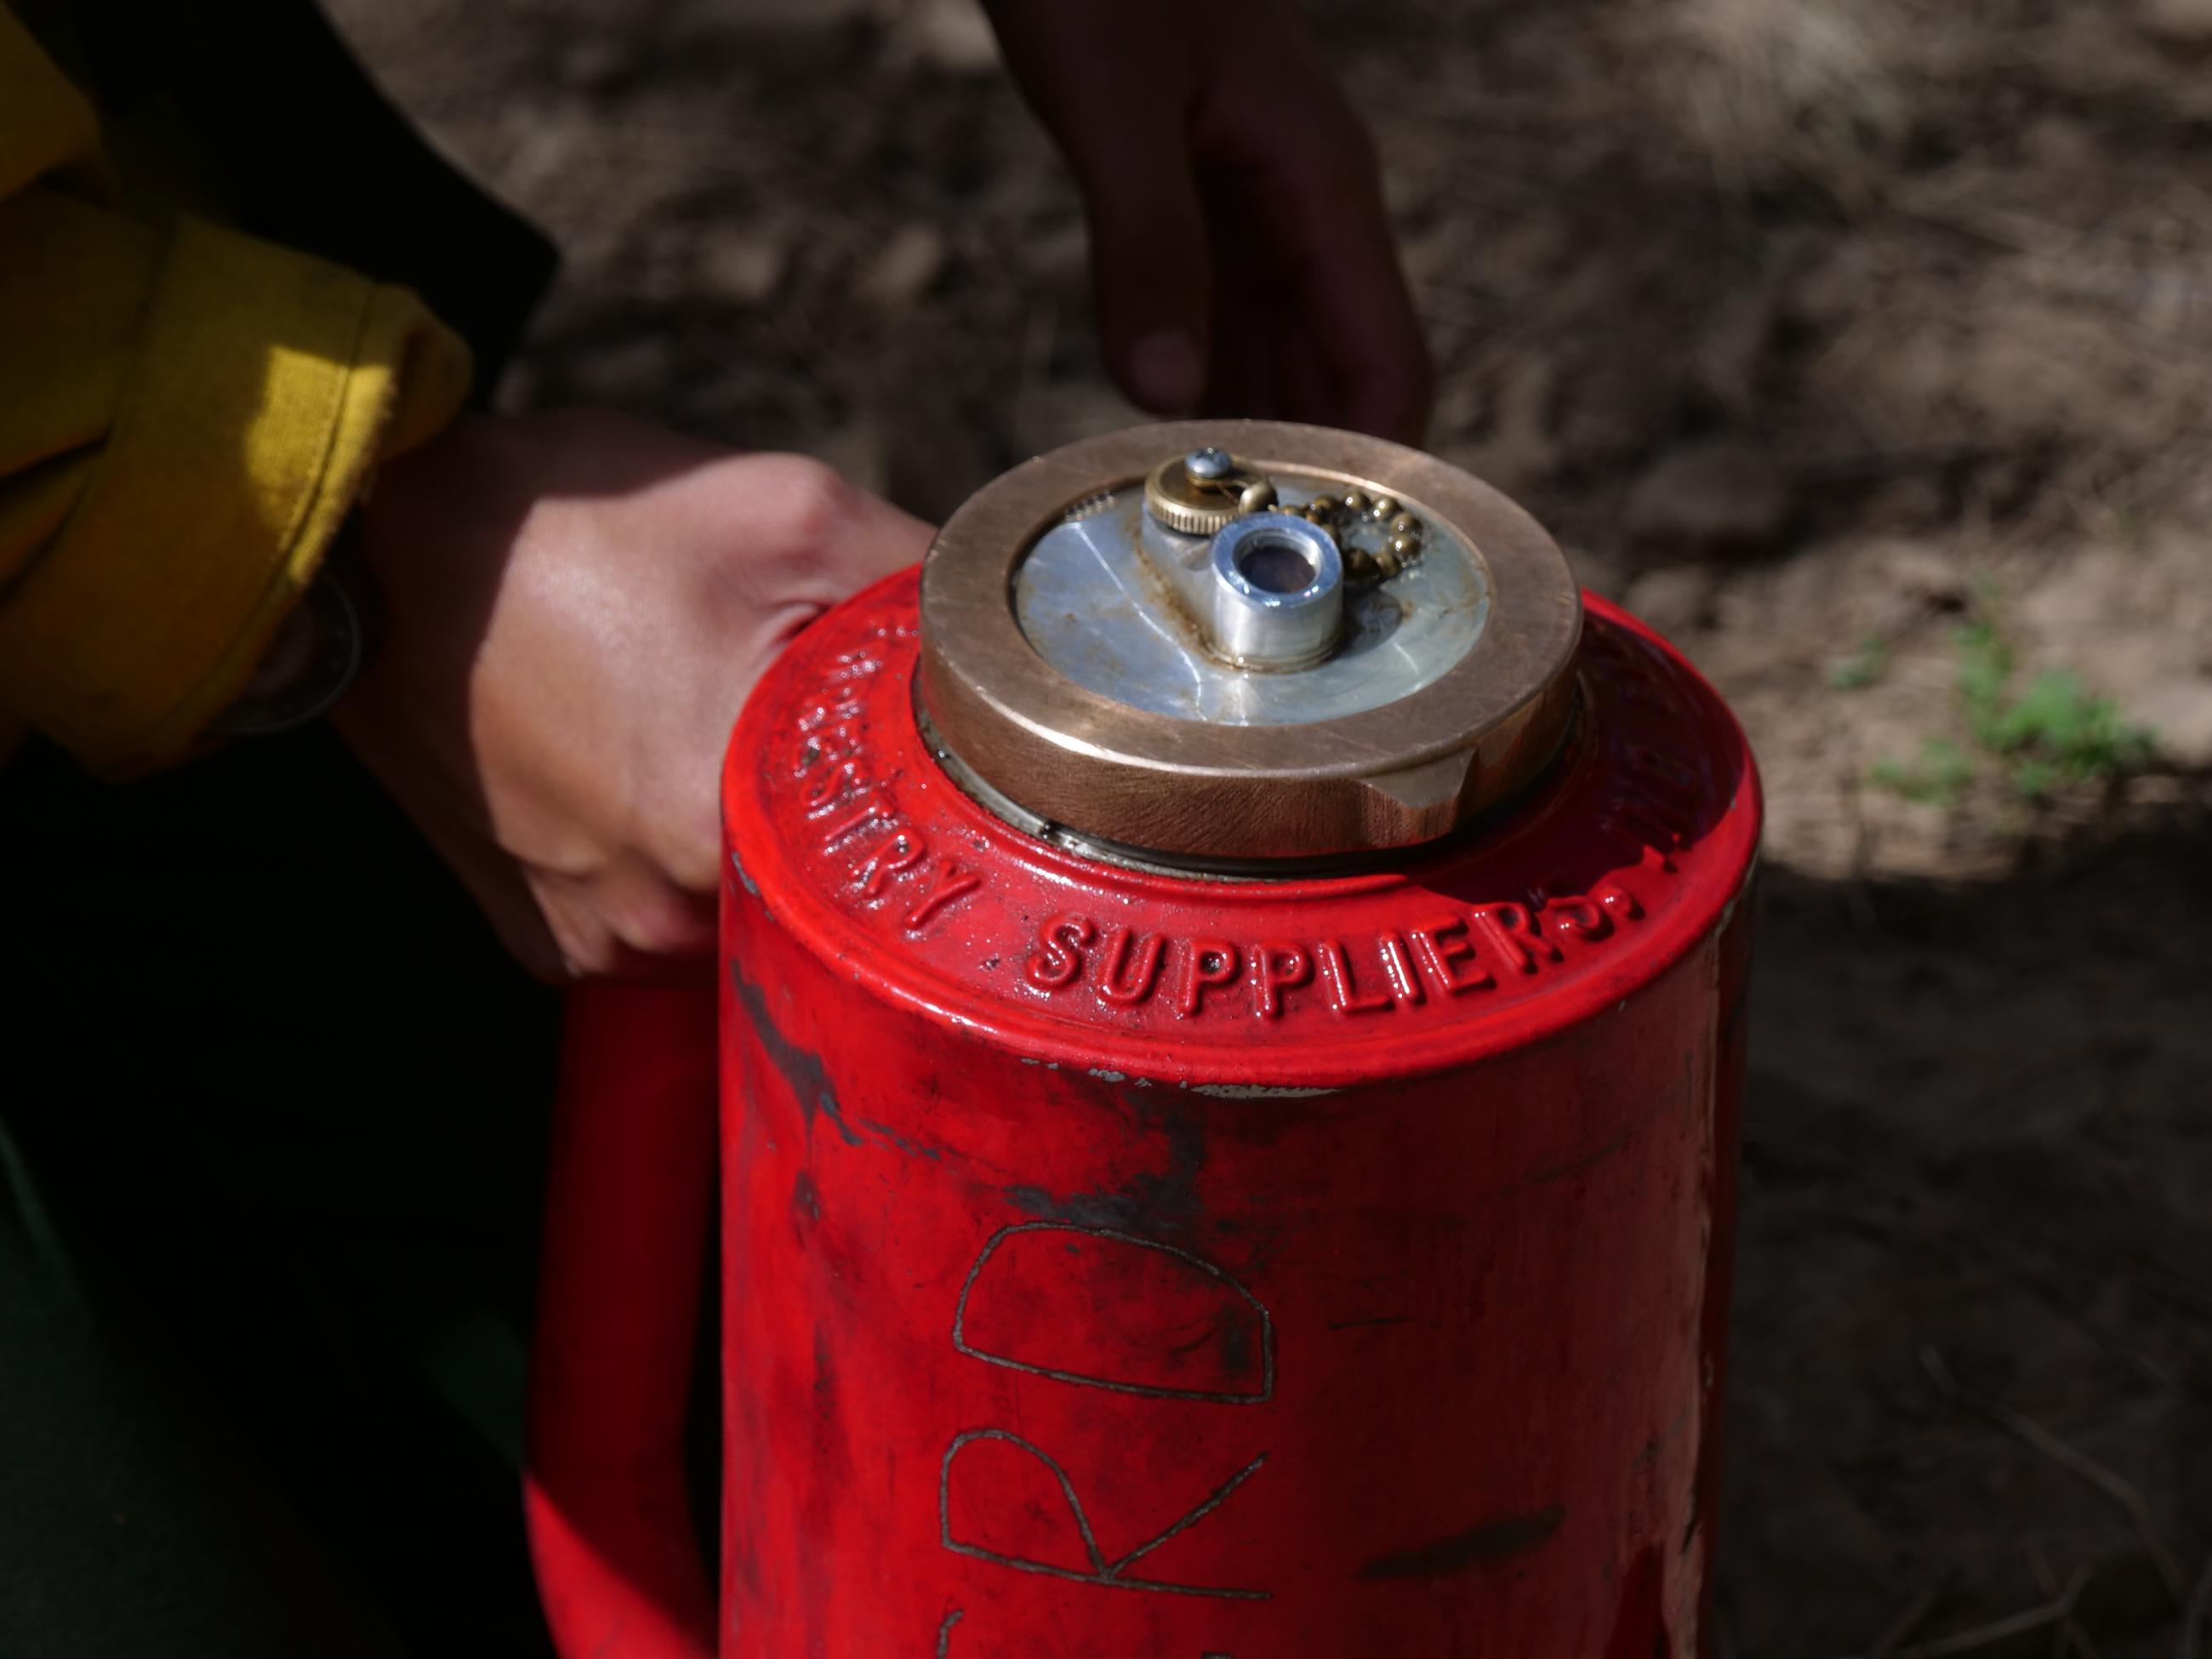 A red fuel can is shown being gripped by a firefighter's hand.